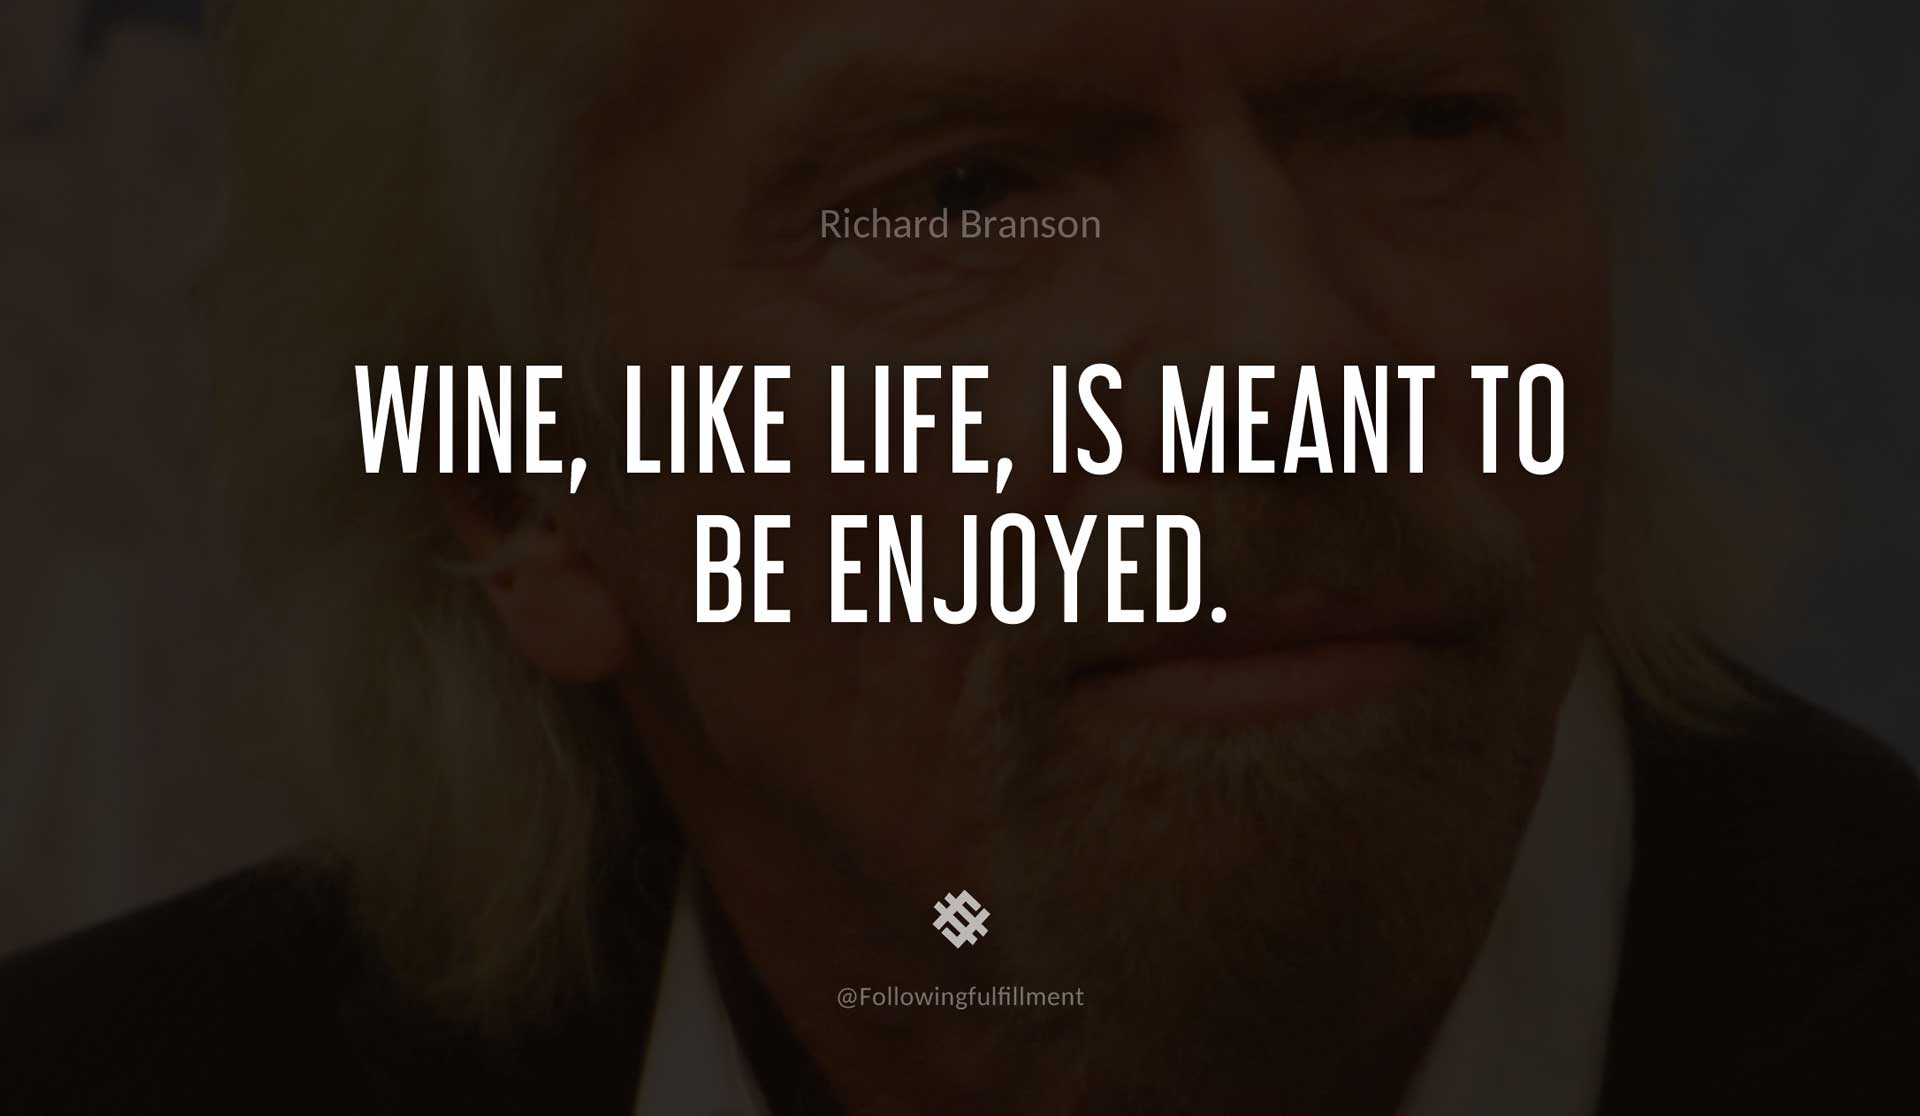 Wine,-like-life,-is-meant-to-be-enjoyed.-RICHARD-BRANSON-Quote.jpg